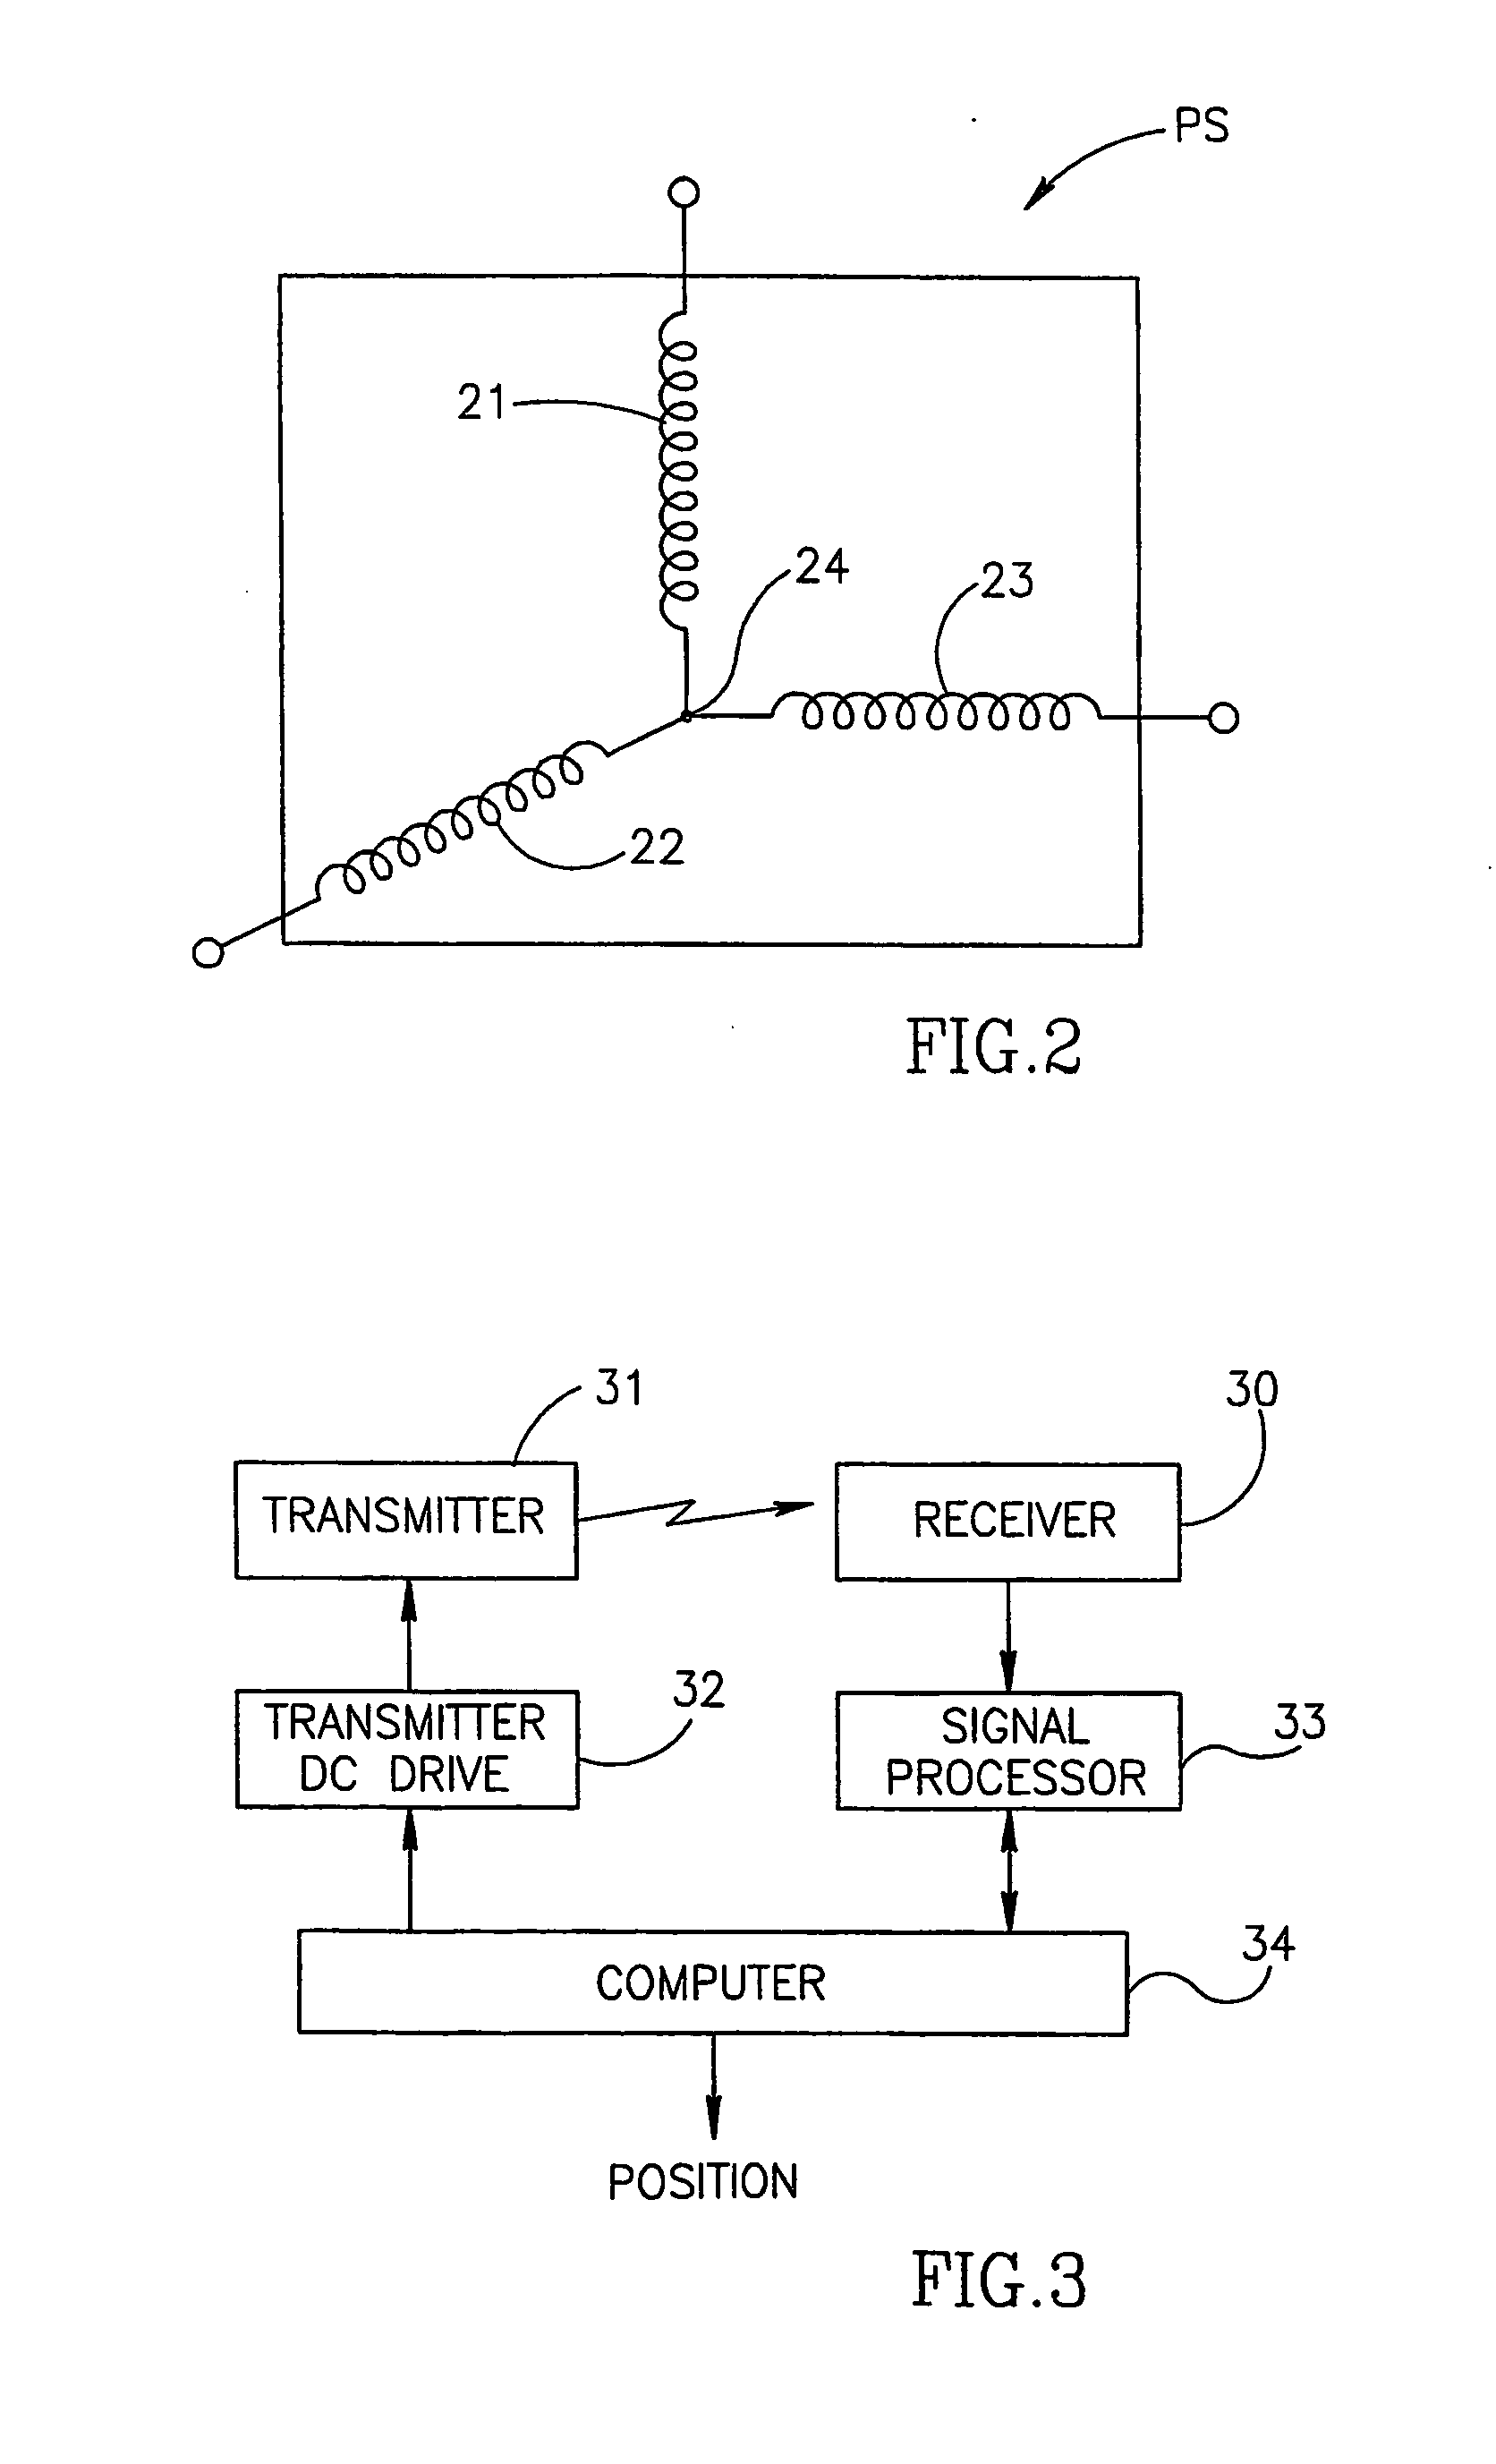 Method and apparatus for monitoring the progress of labor